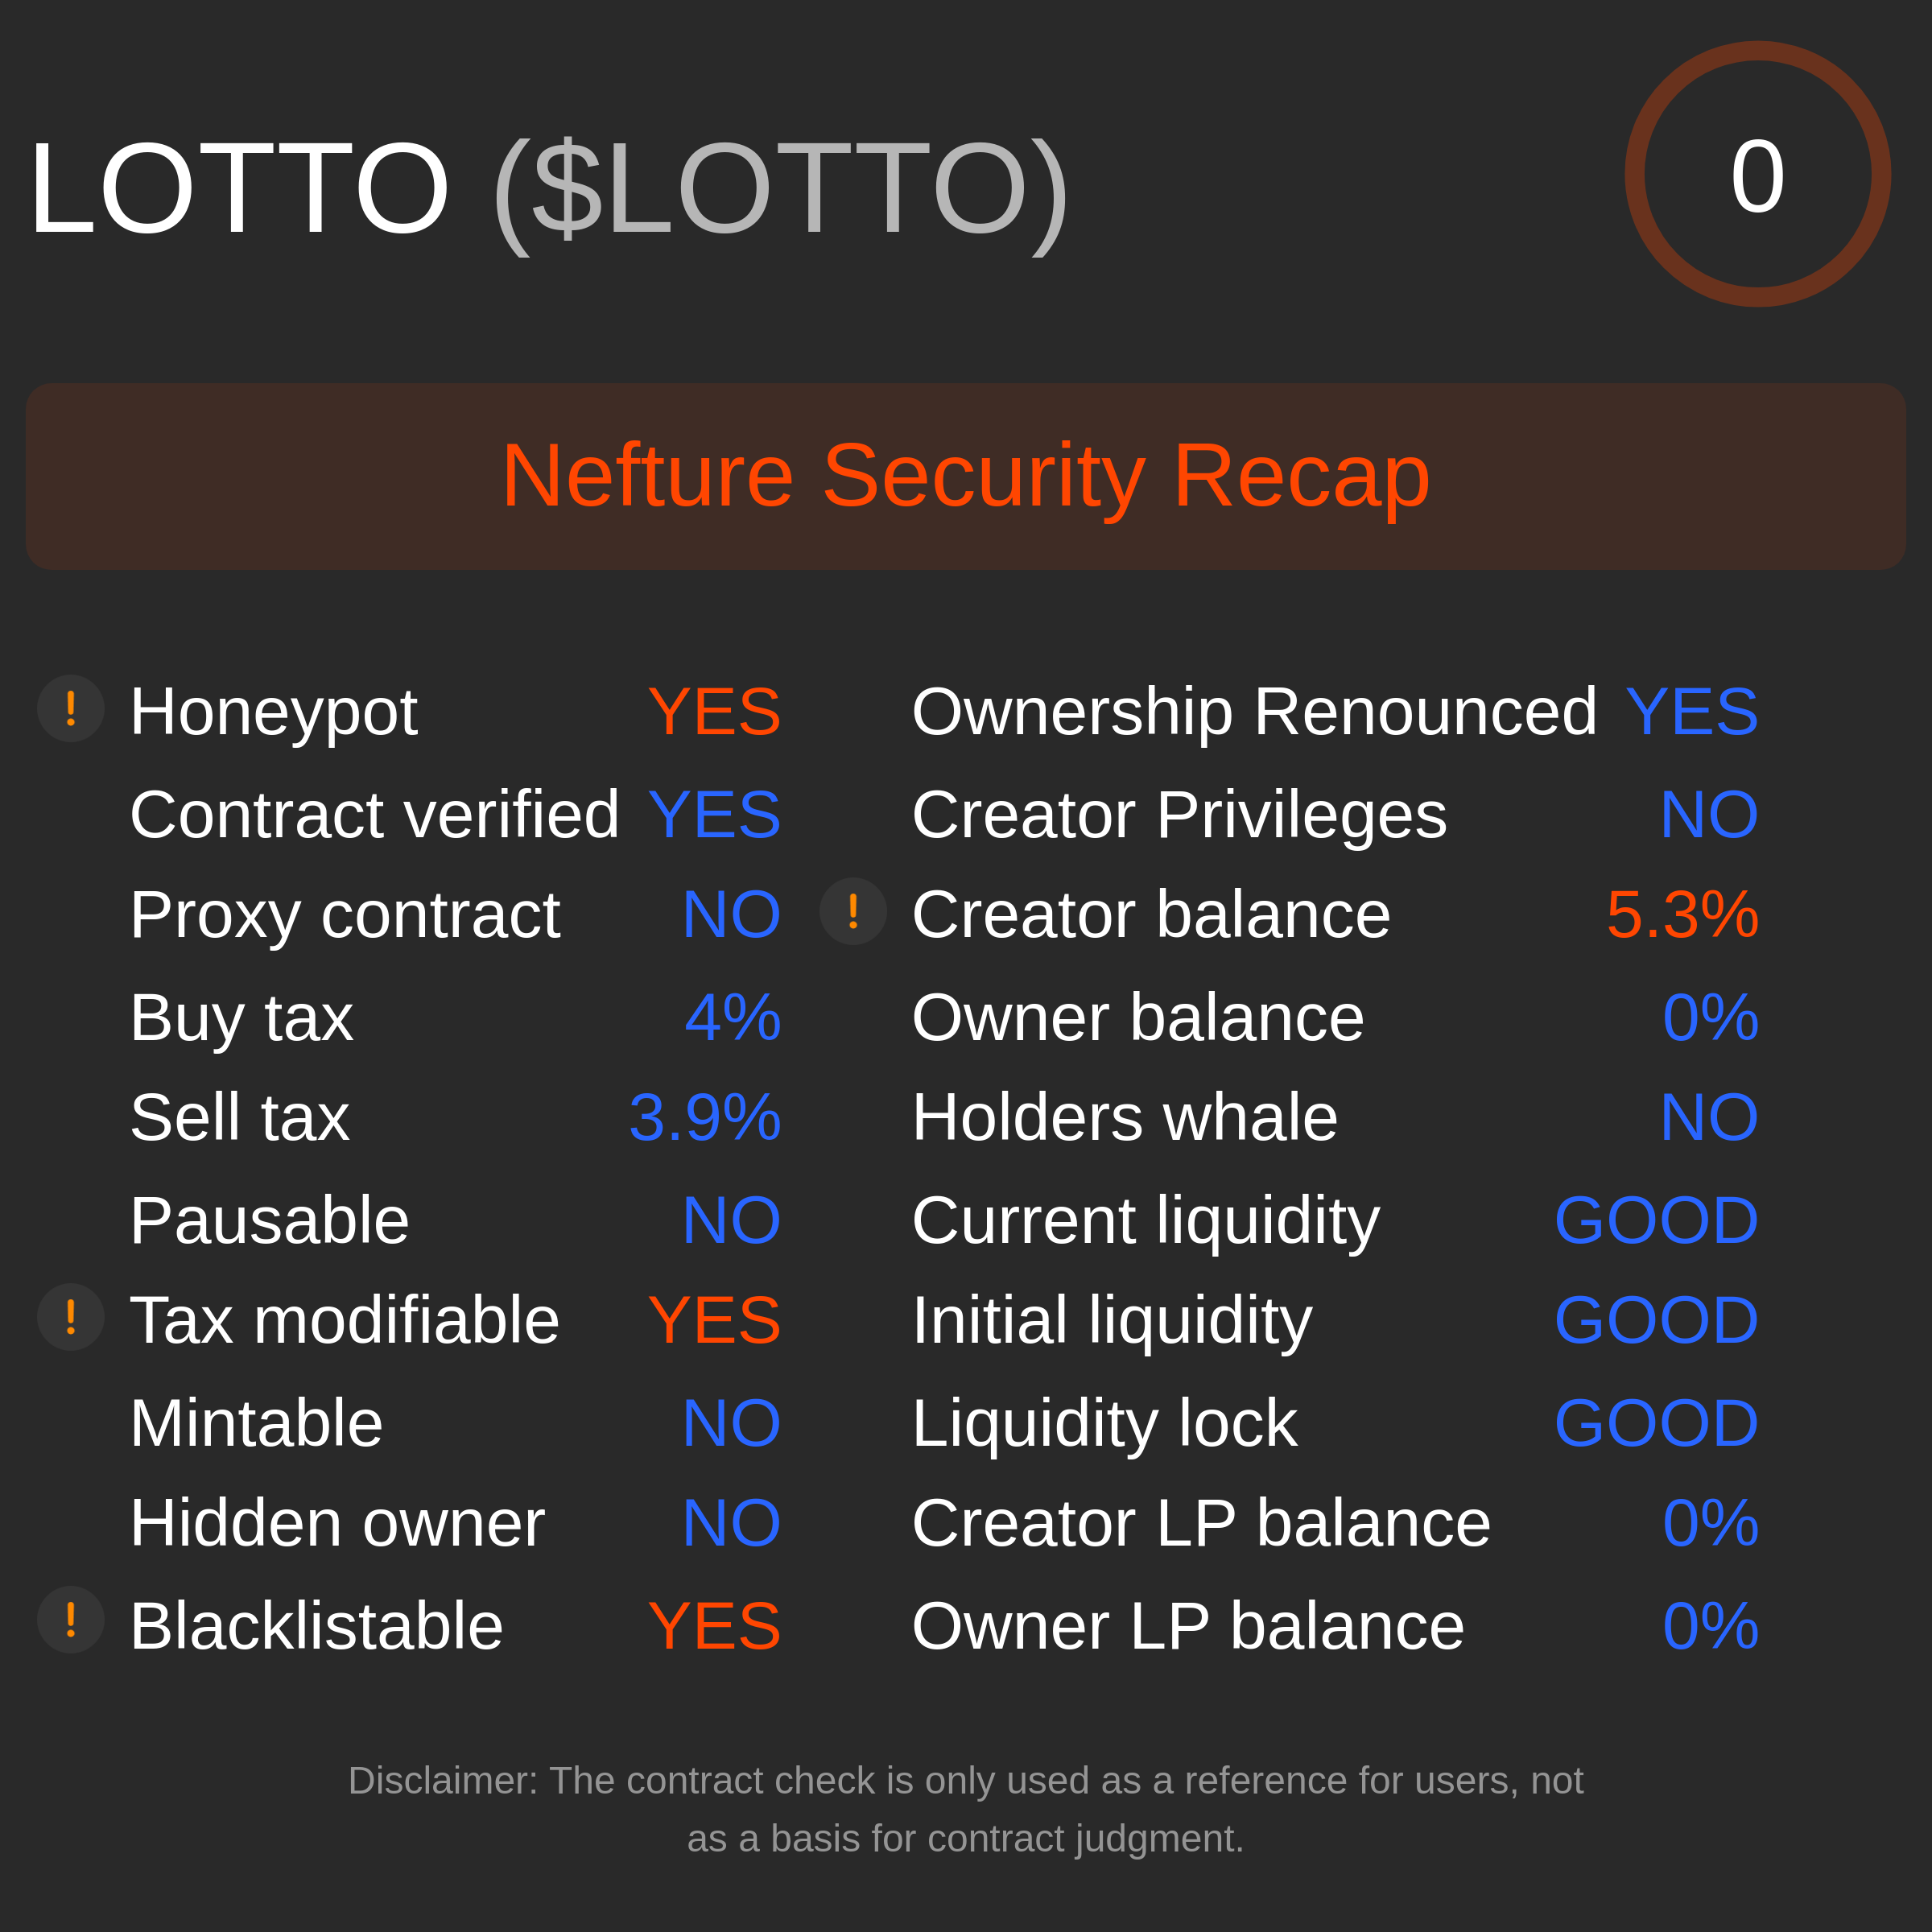 Example of output of the token $LOTTO